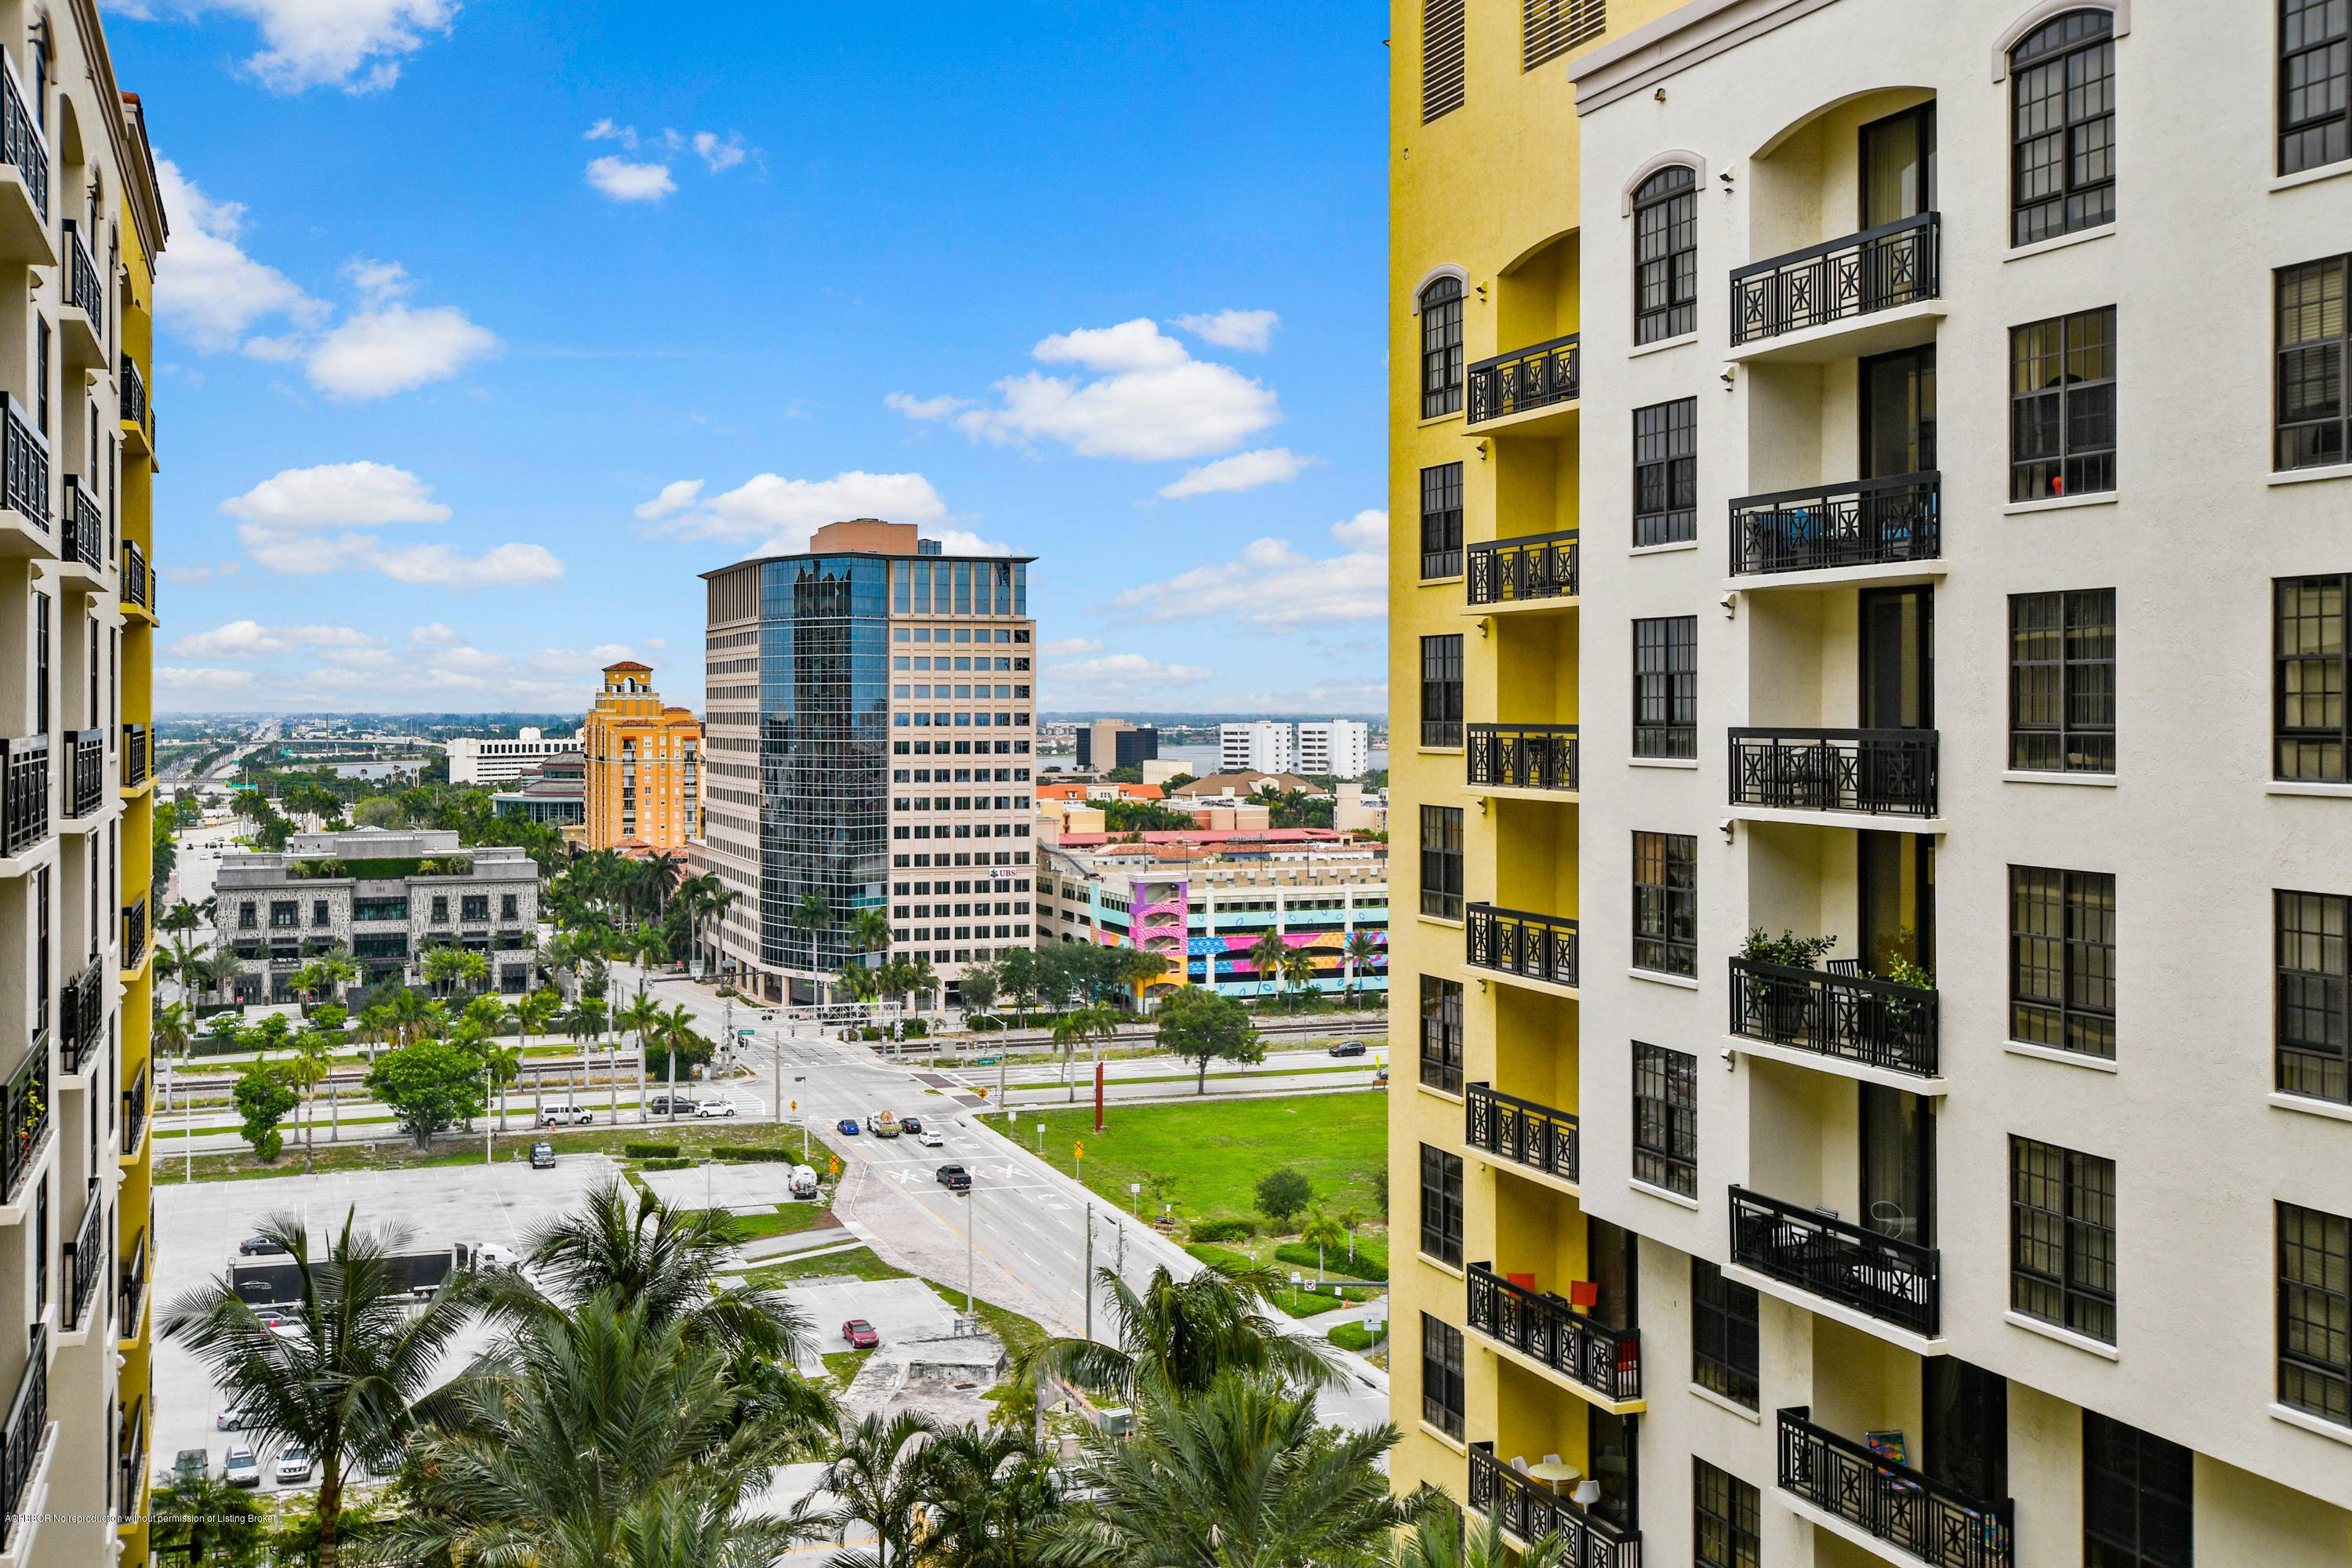 Stunning sunset and city views from this high floor condo in sought after One City Plaza of West Palm Beach.